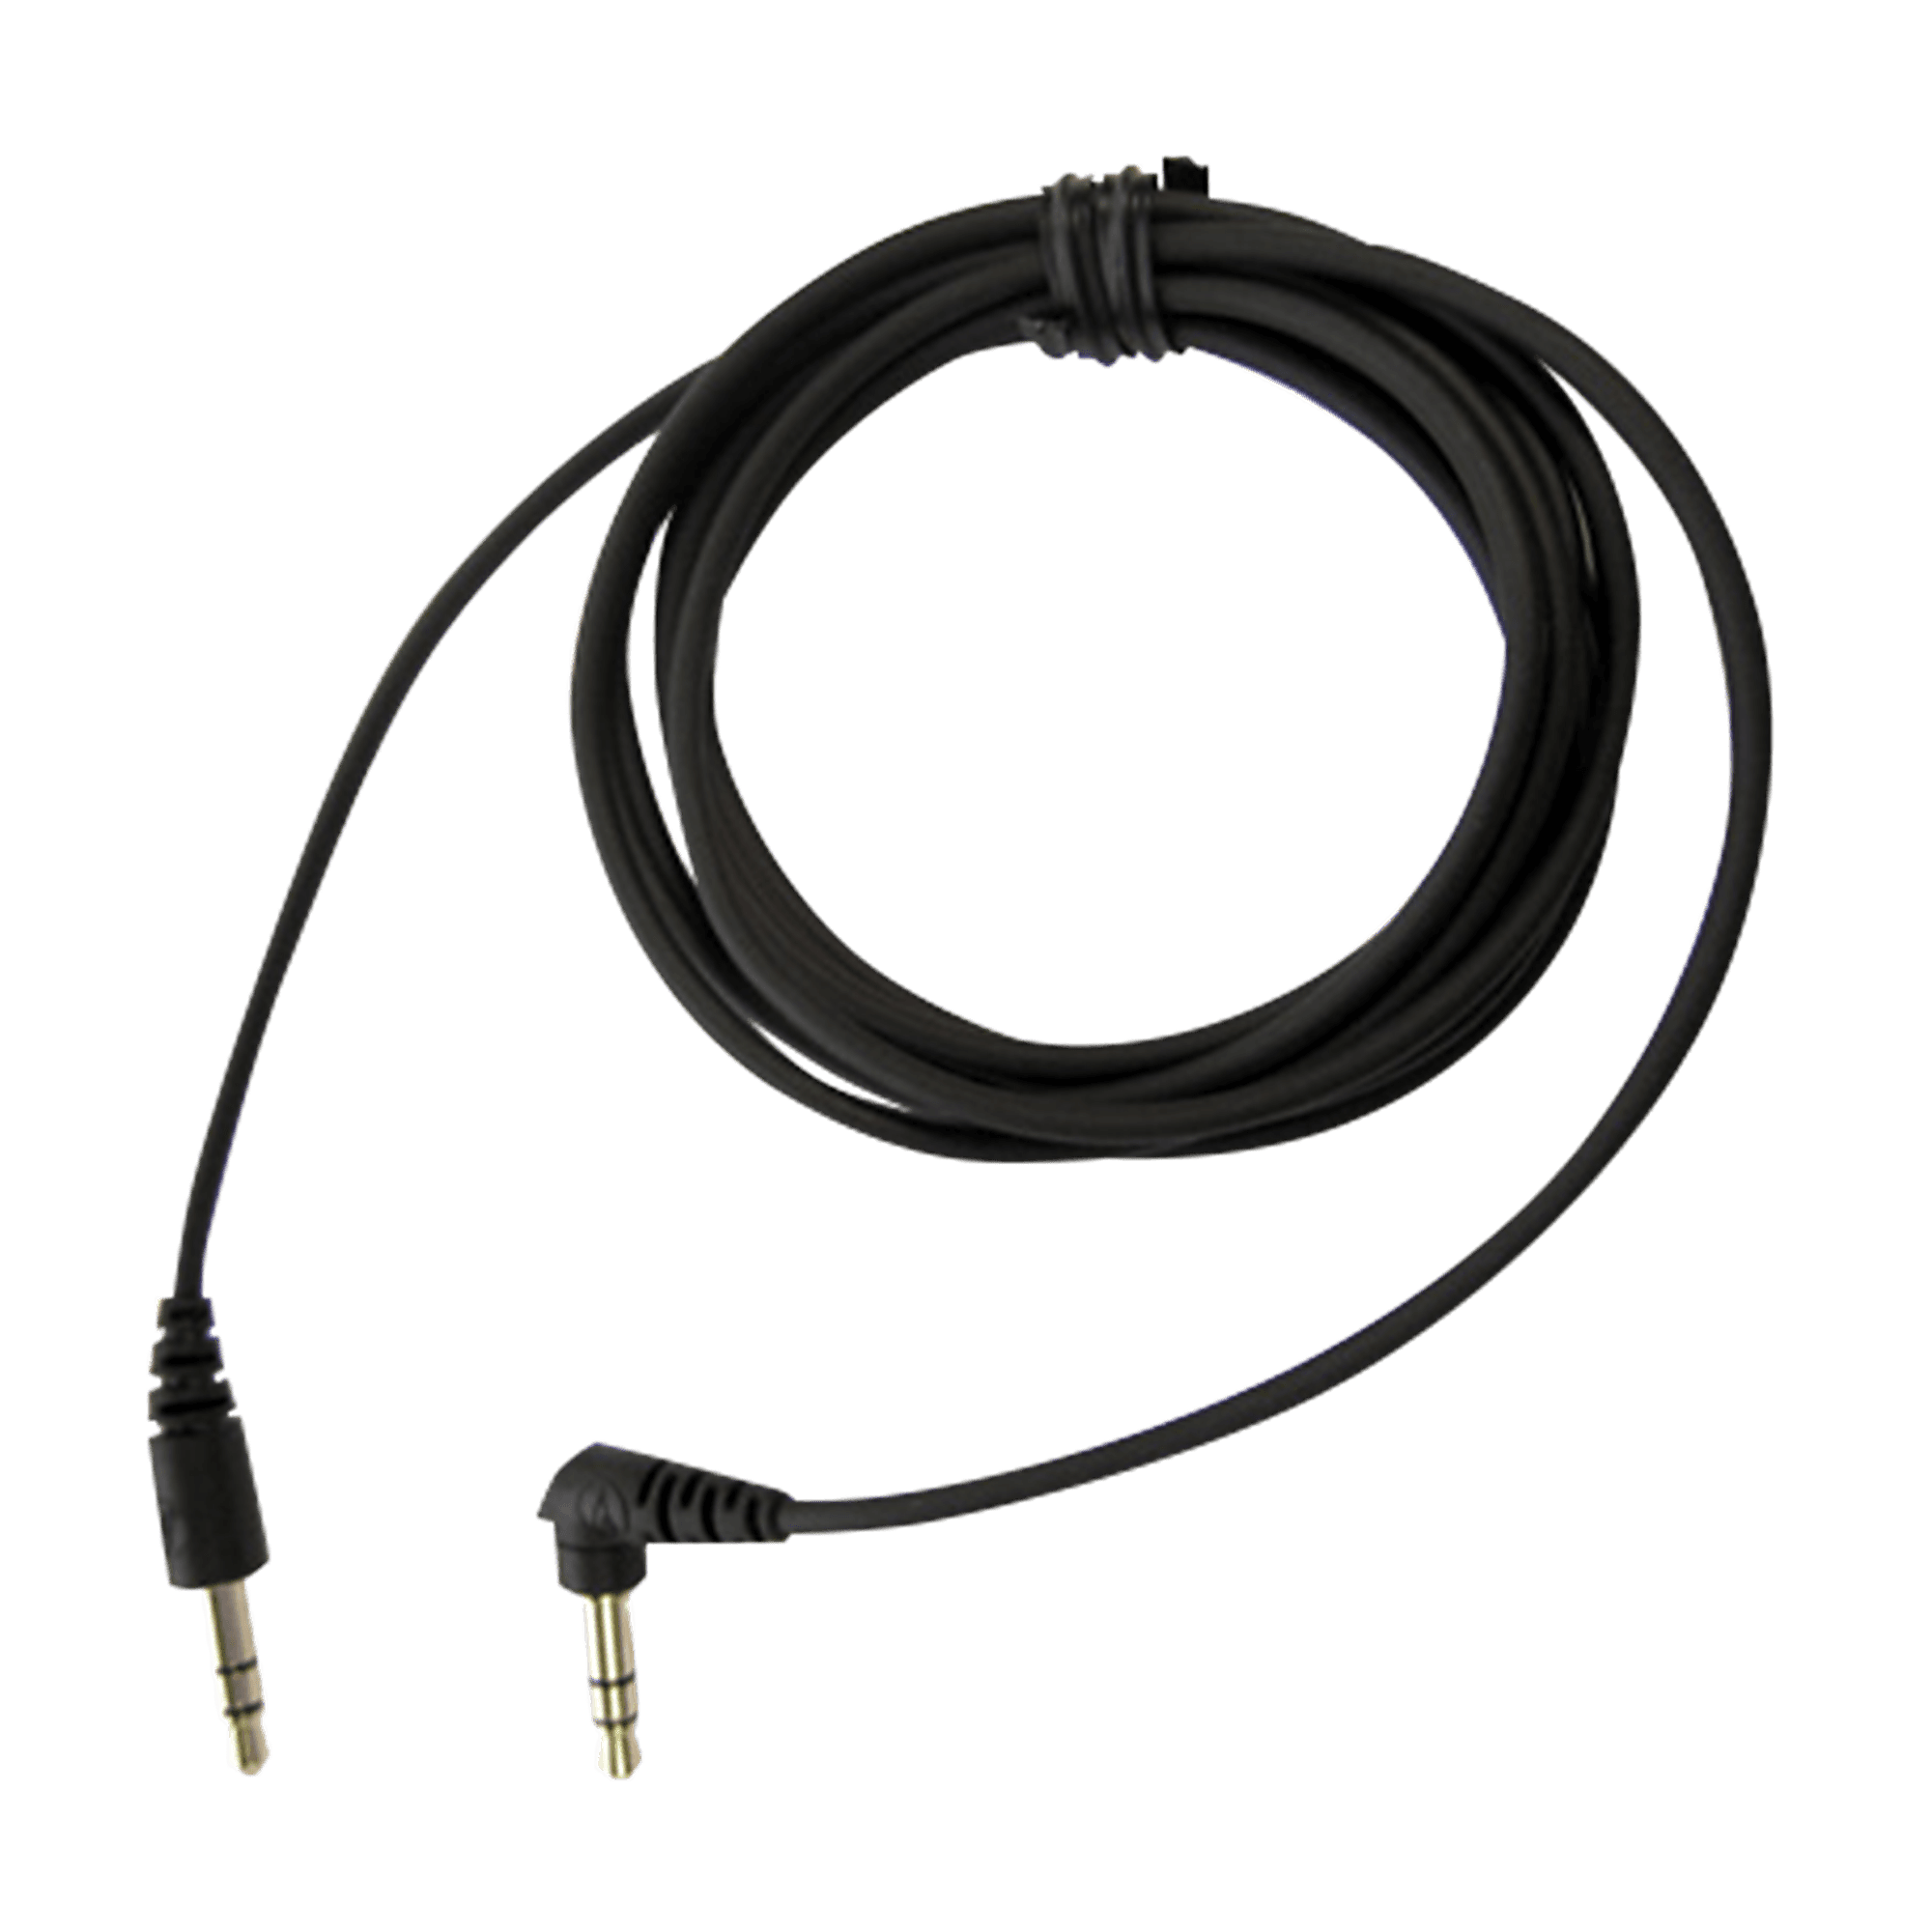 ATH-ANC7 Audio Cable